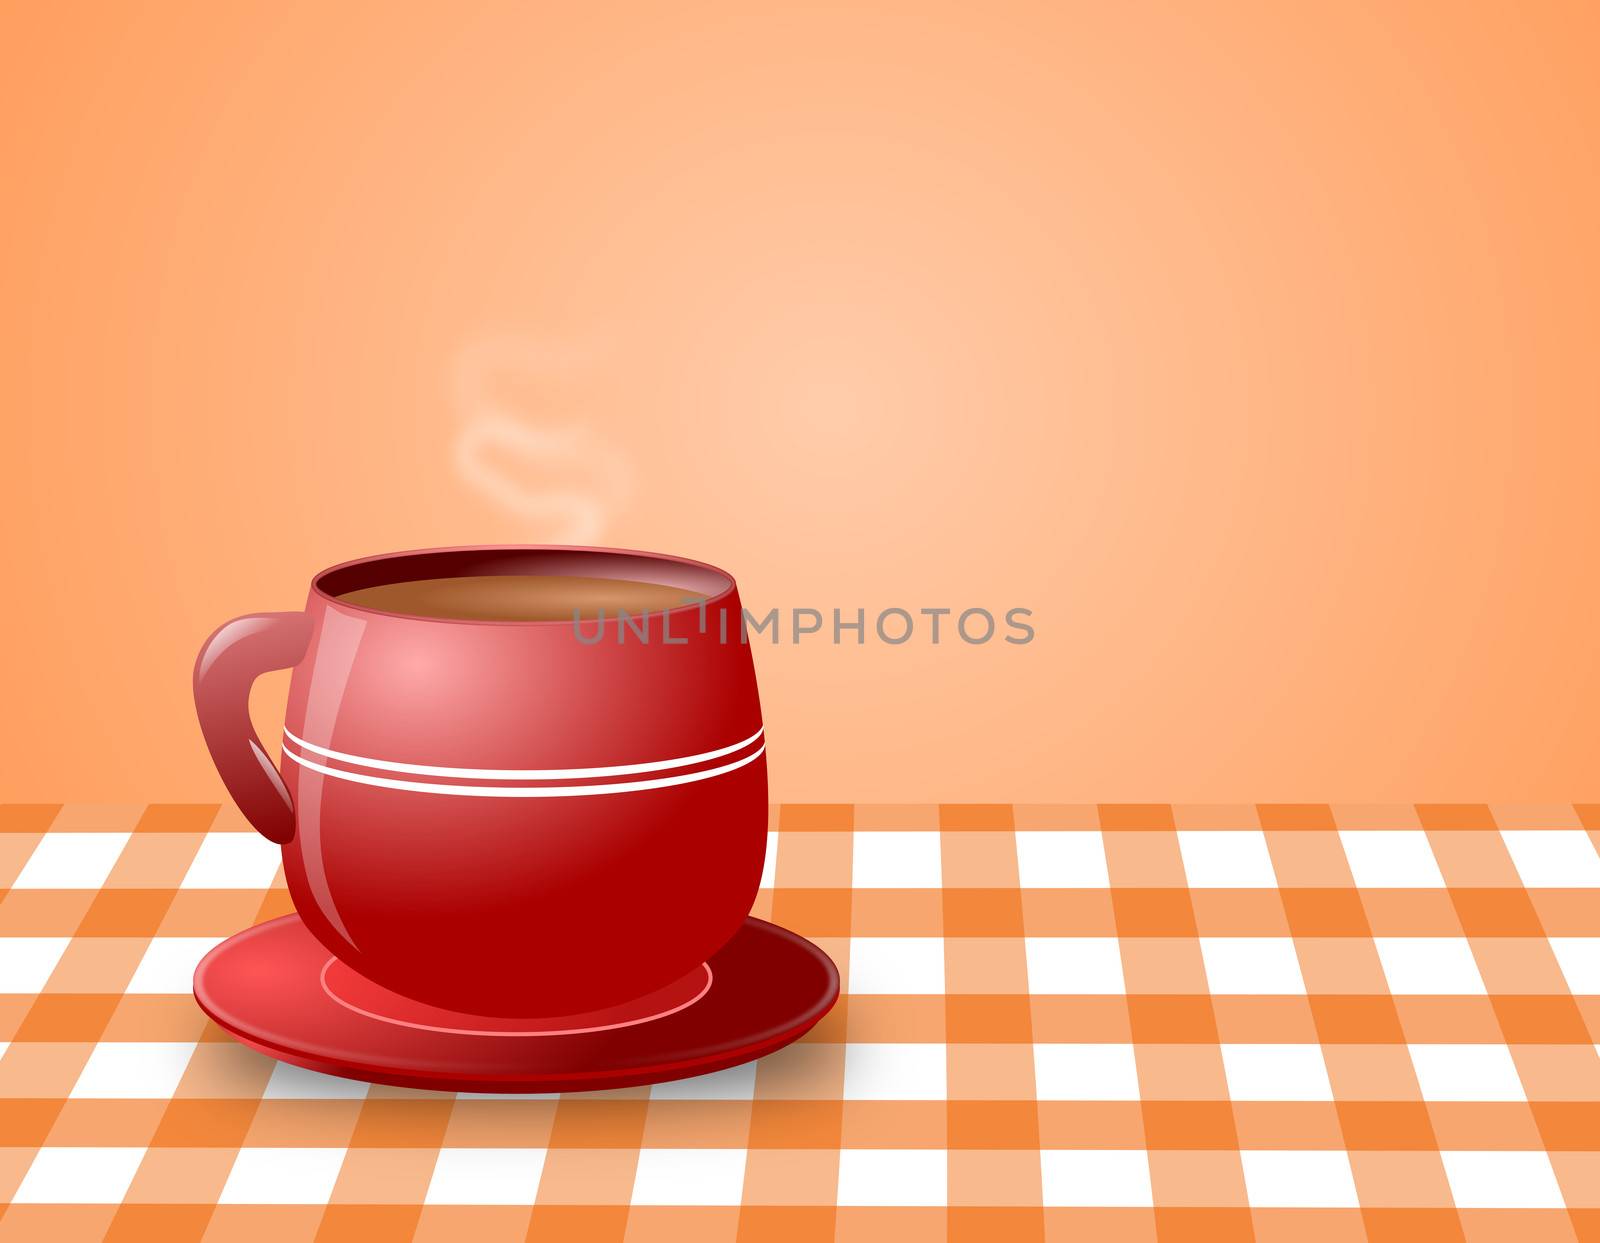 Illustration of steaming hot coffee in a red cup and saucer placed on a checkered table cloth
